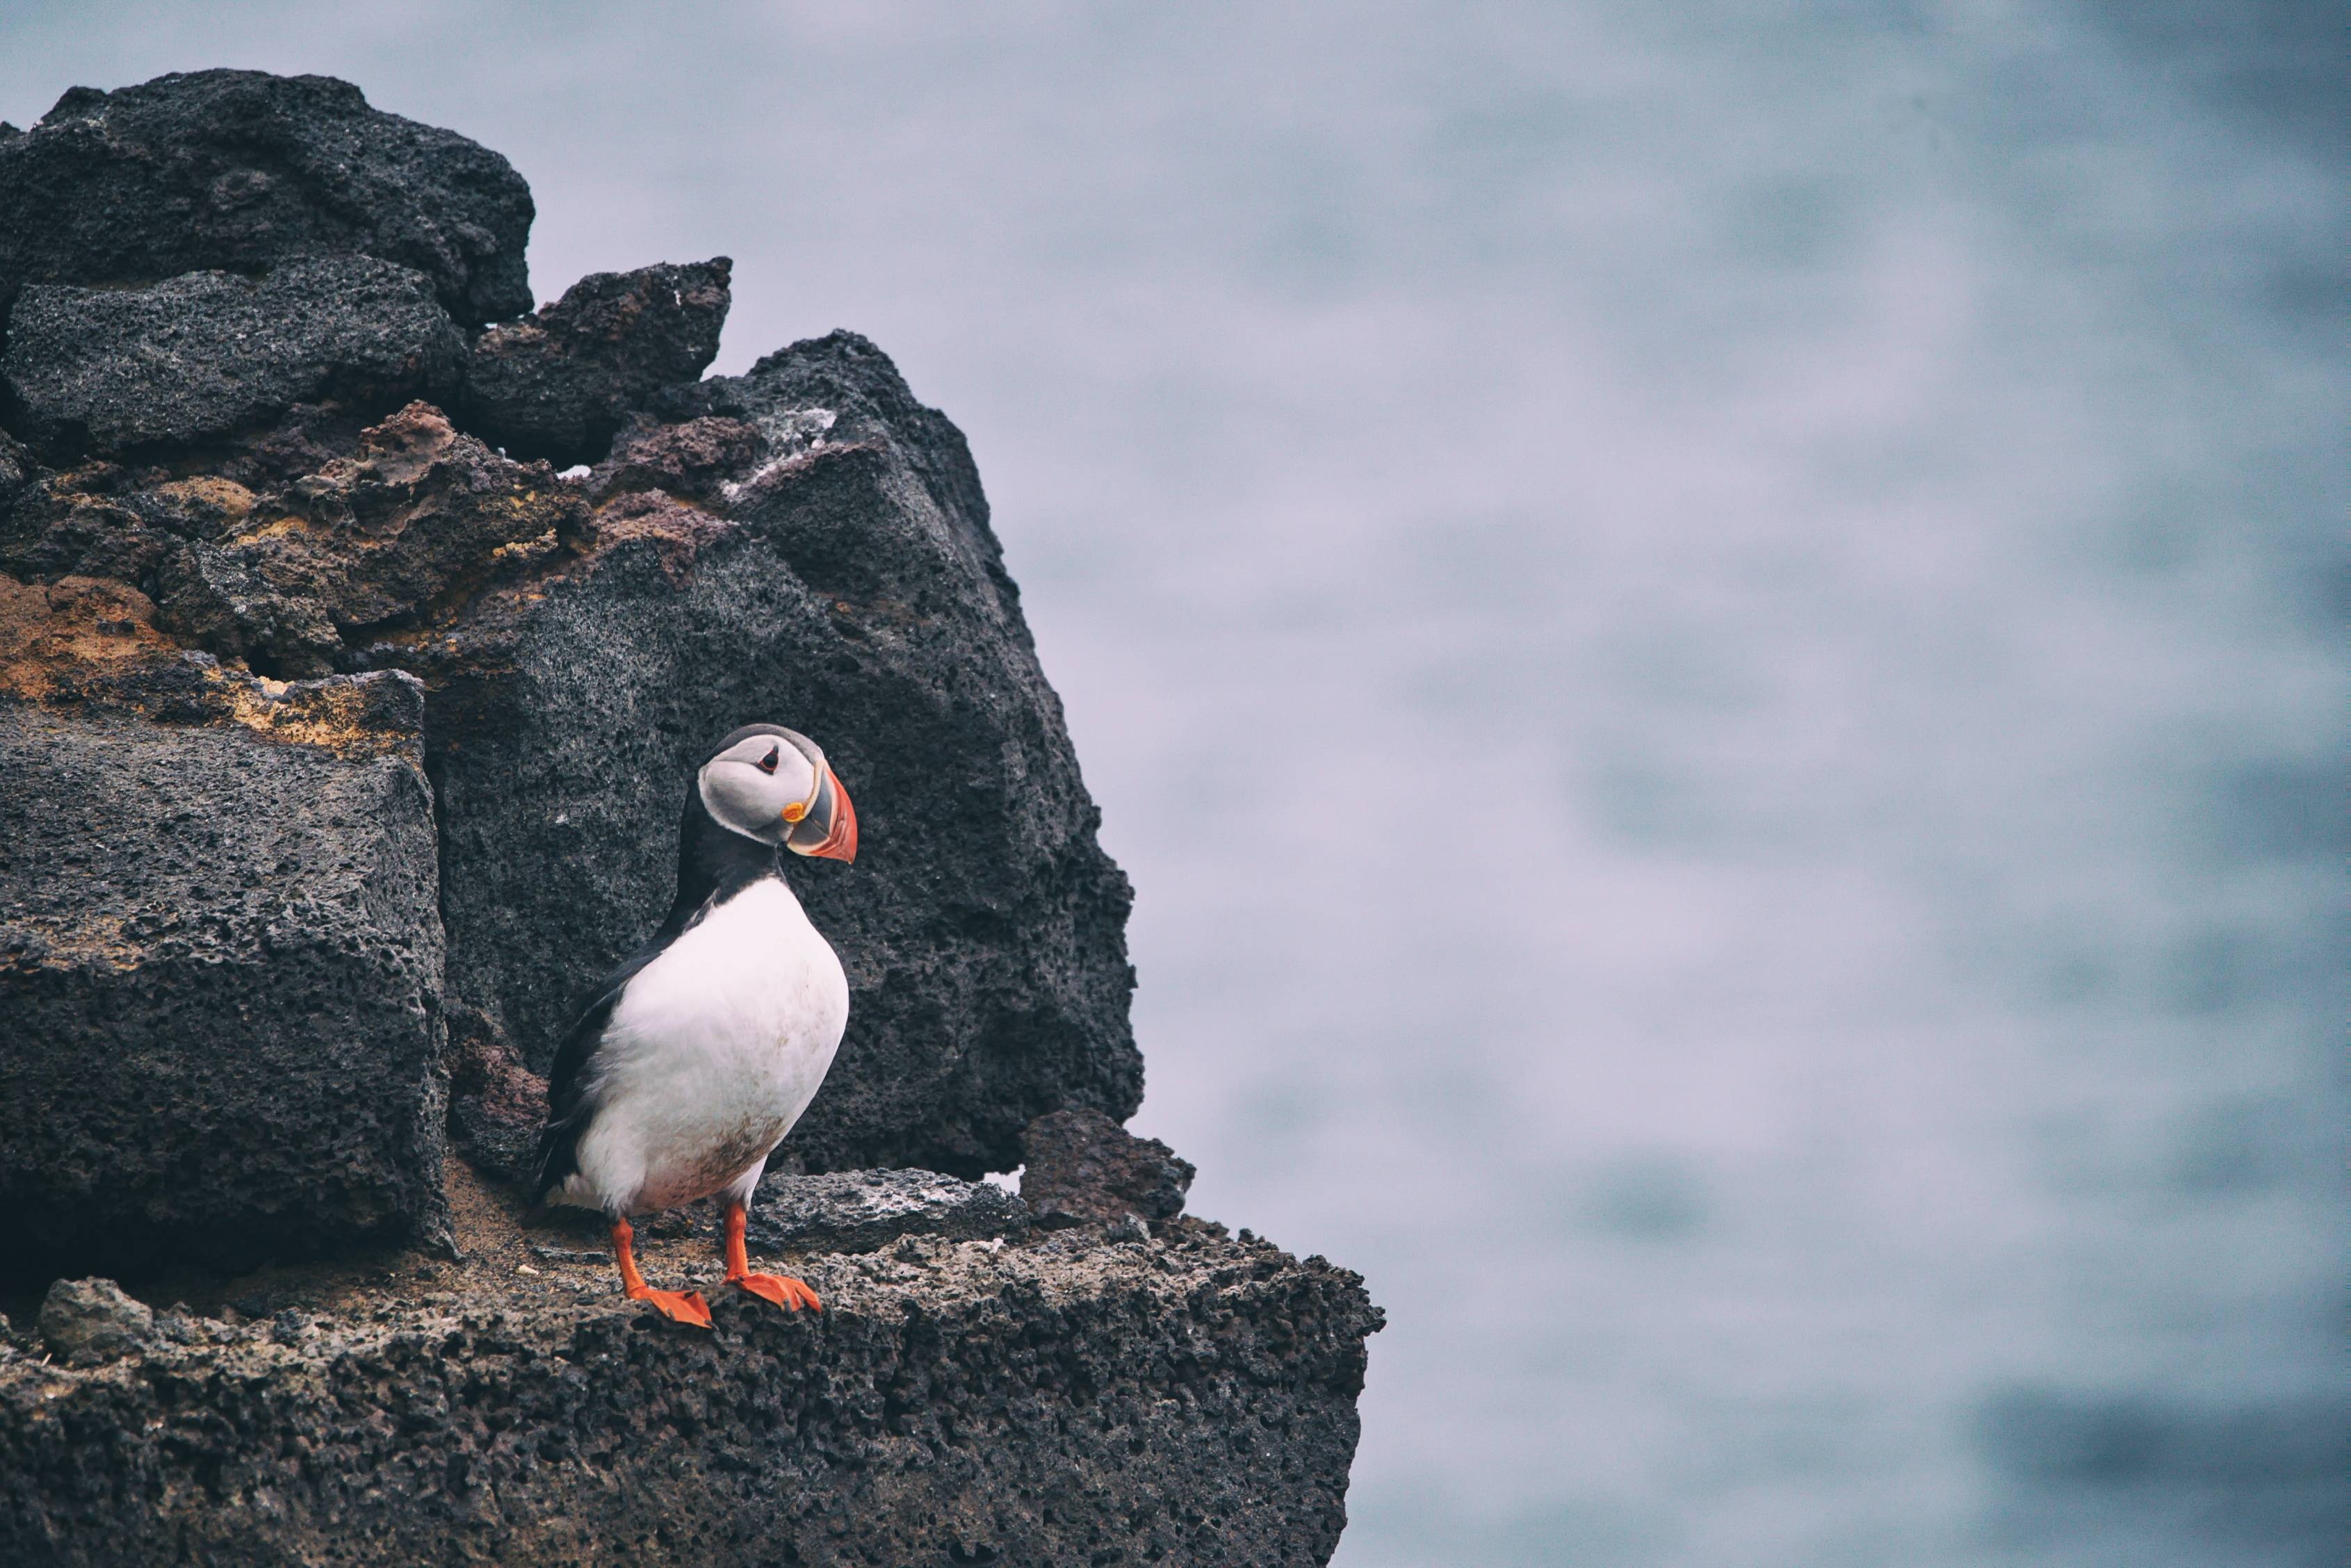 Puffin-standing-on-a-cliff-side-in-Iceland-with-the-ocean-in-the-backround